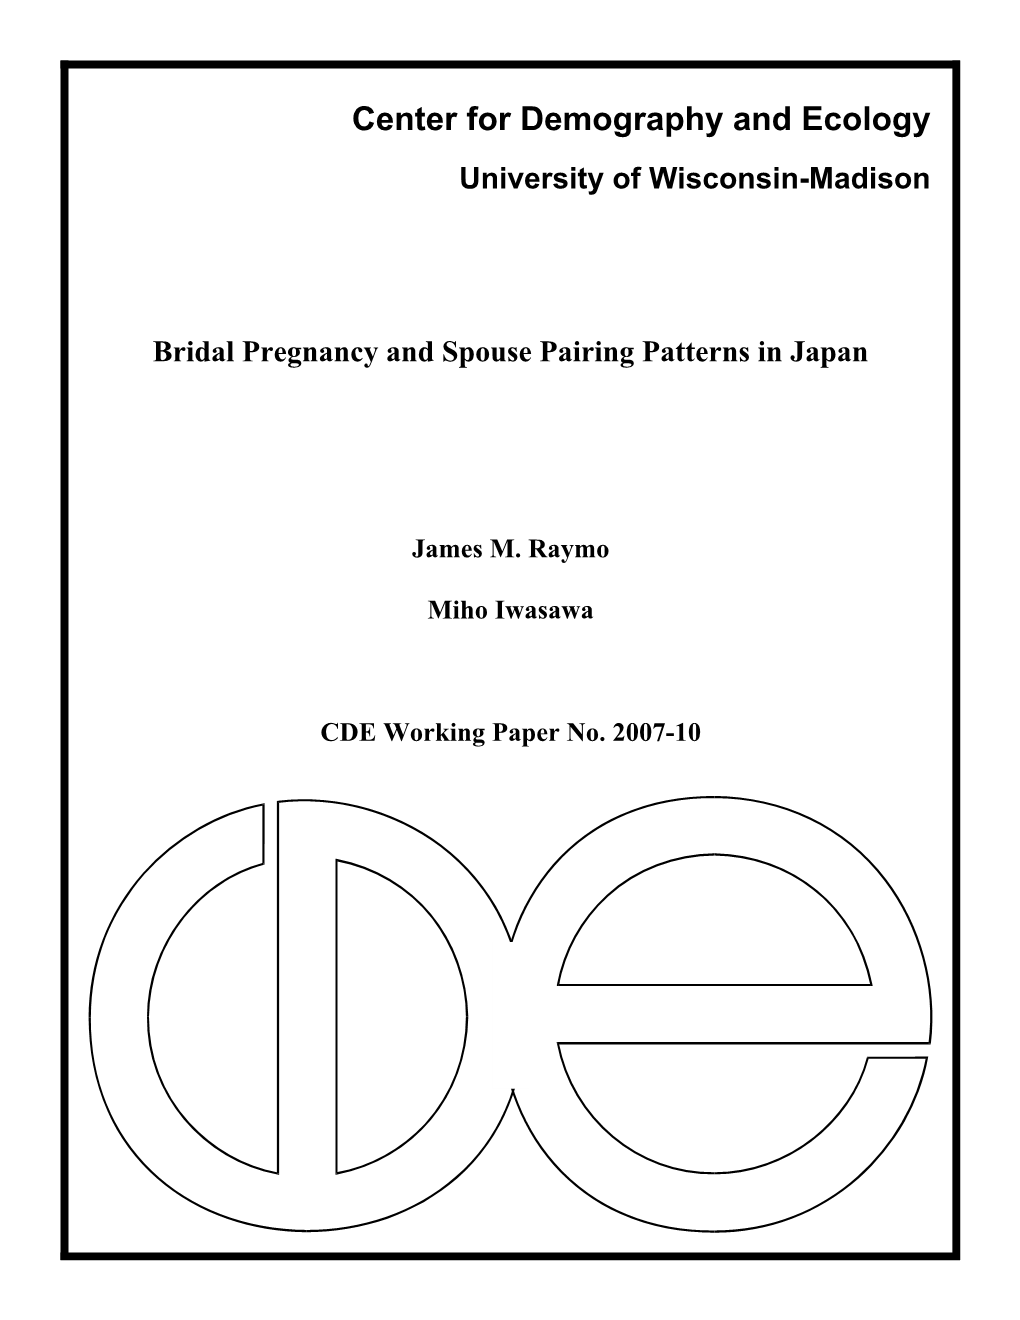 University of Wisconsin-Madison Bridal Pregnancy and Spouse Pairing Patterns in Japan